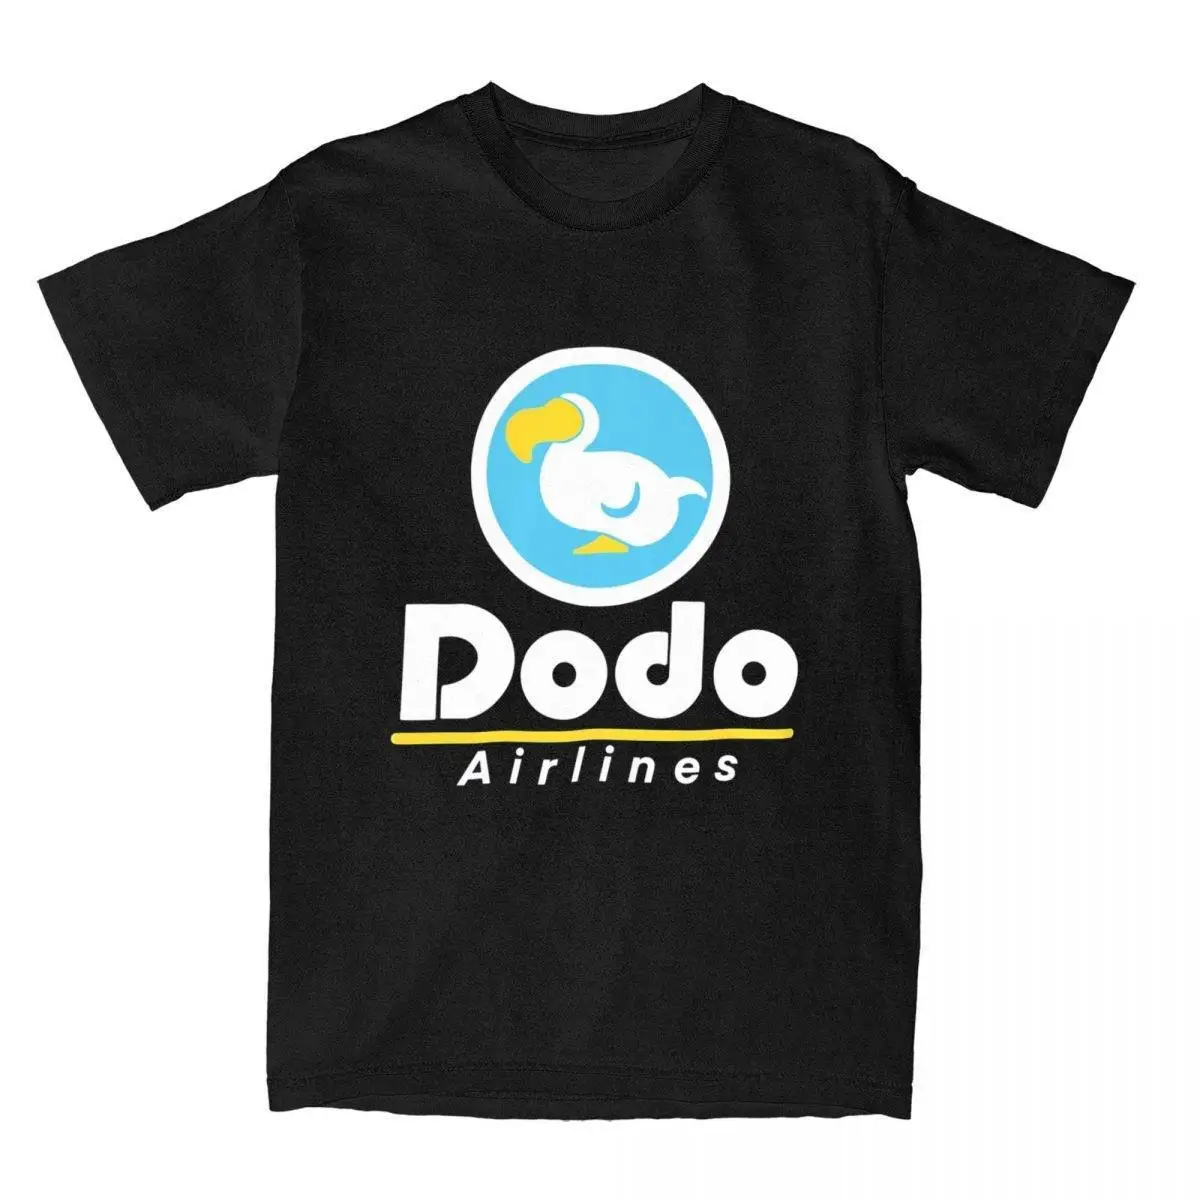 Animal Crossing New Horizons T Shirts Men Cotton Vintage T-Shirts Round Collar Dodo Airlines Tees Short Sleeve Clothing